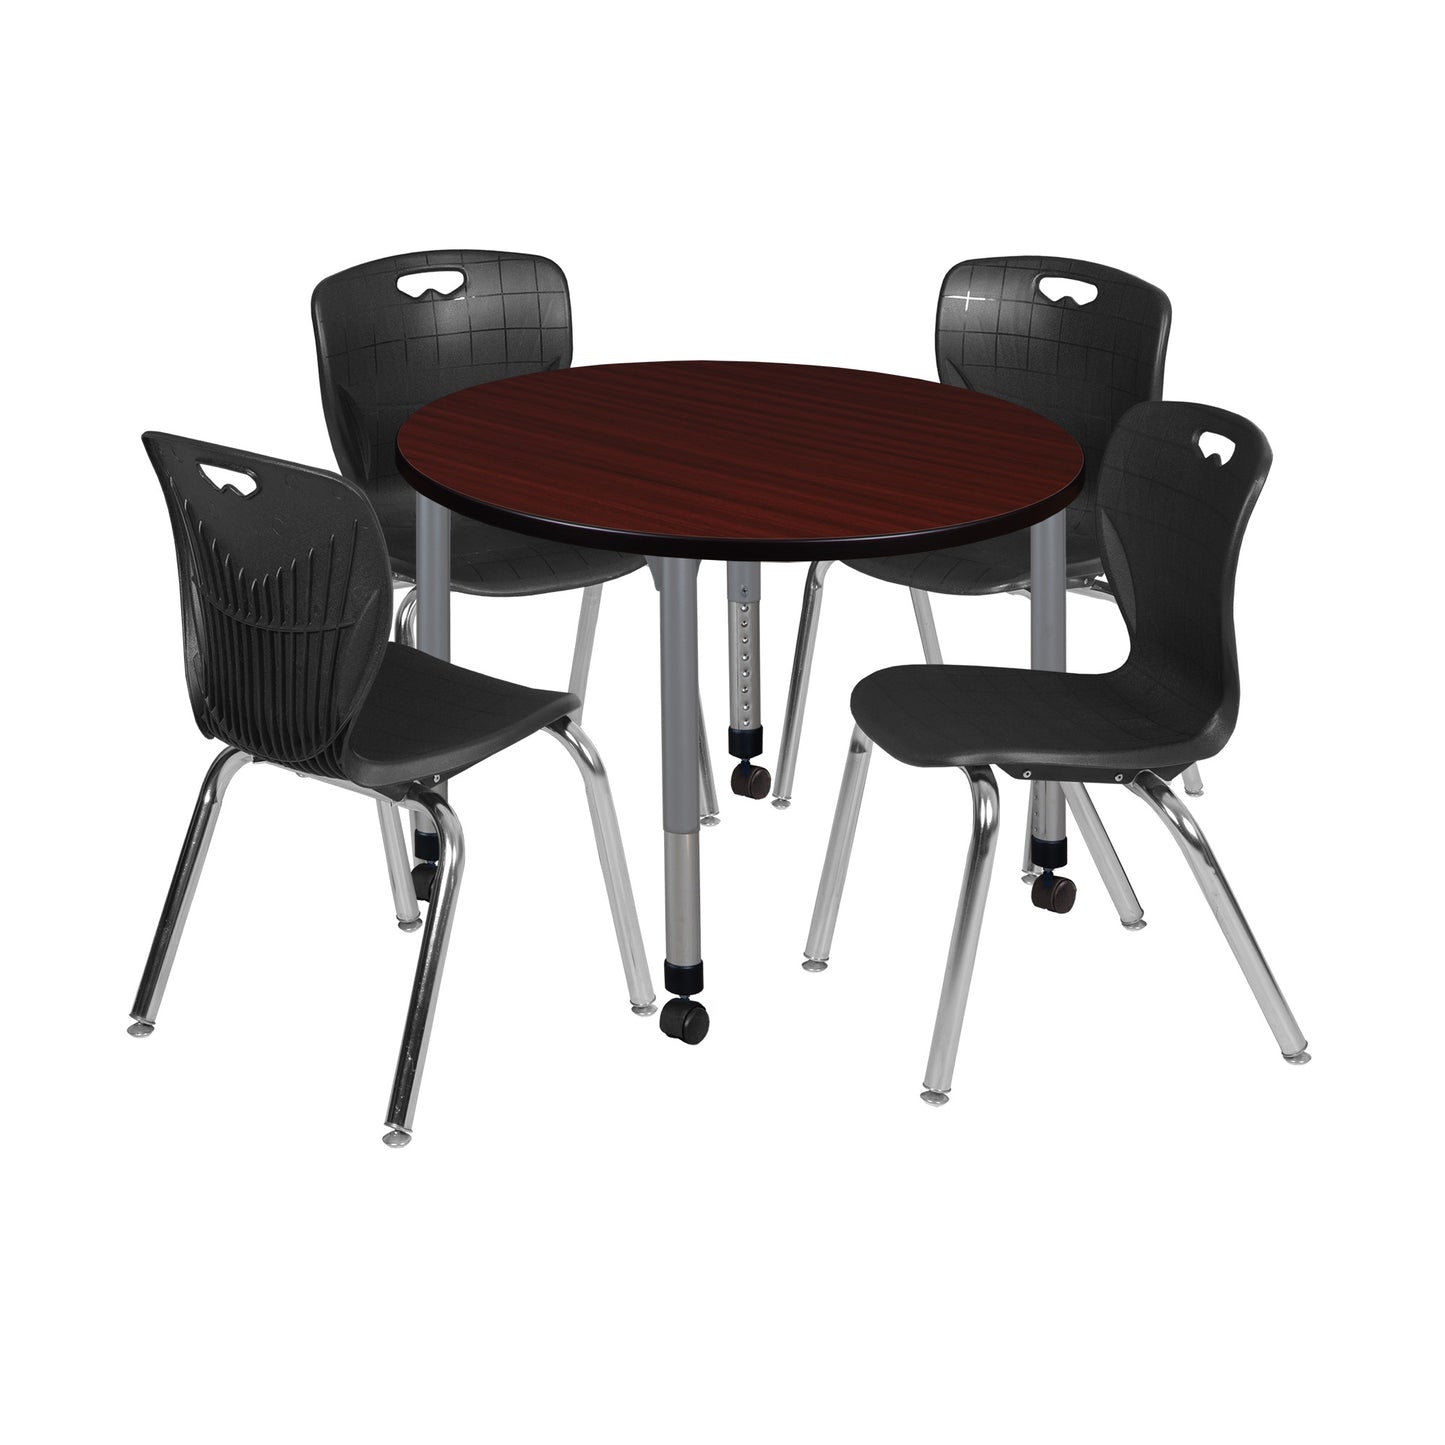 Regency Kee 42 in. Round Adjustable Classroom Table & 4 Andy 18 in. Stack Chairs